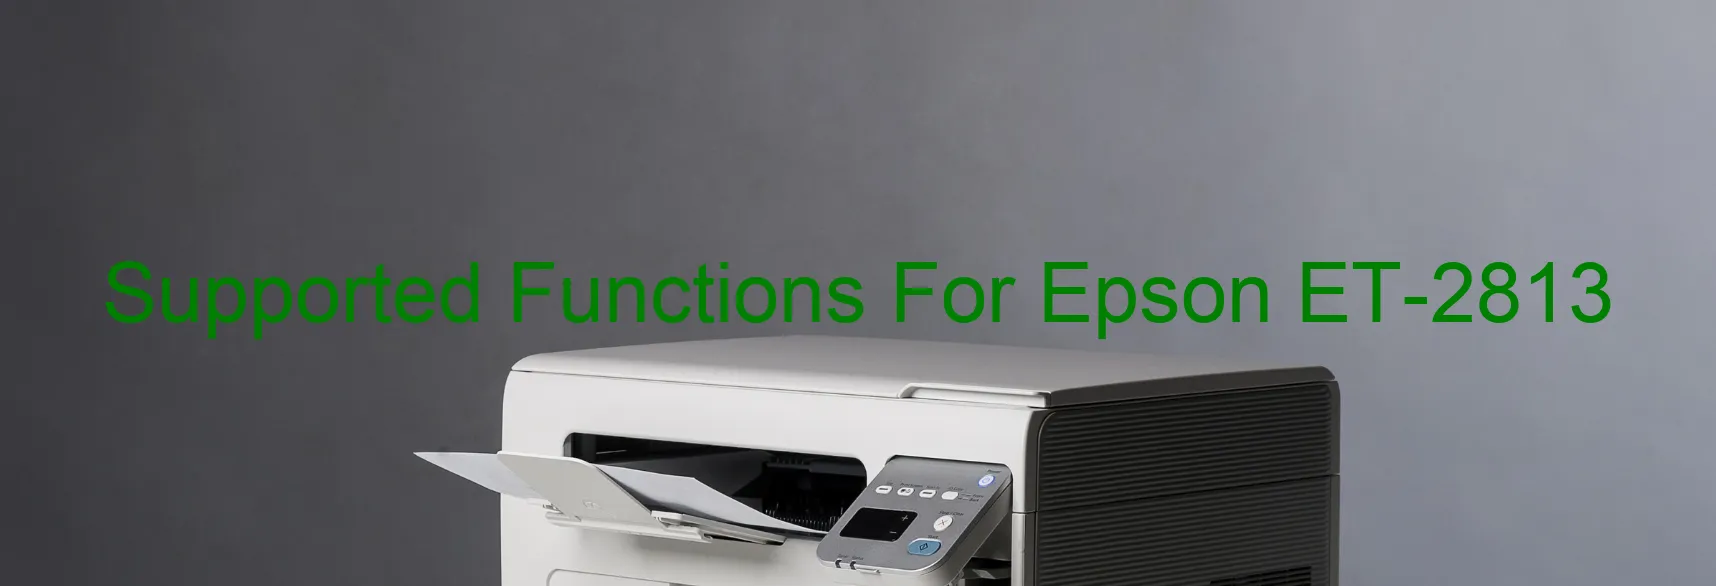 supported-functions-for-epson-et-2813.webp